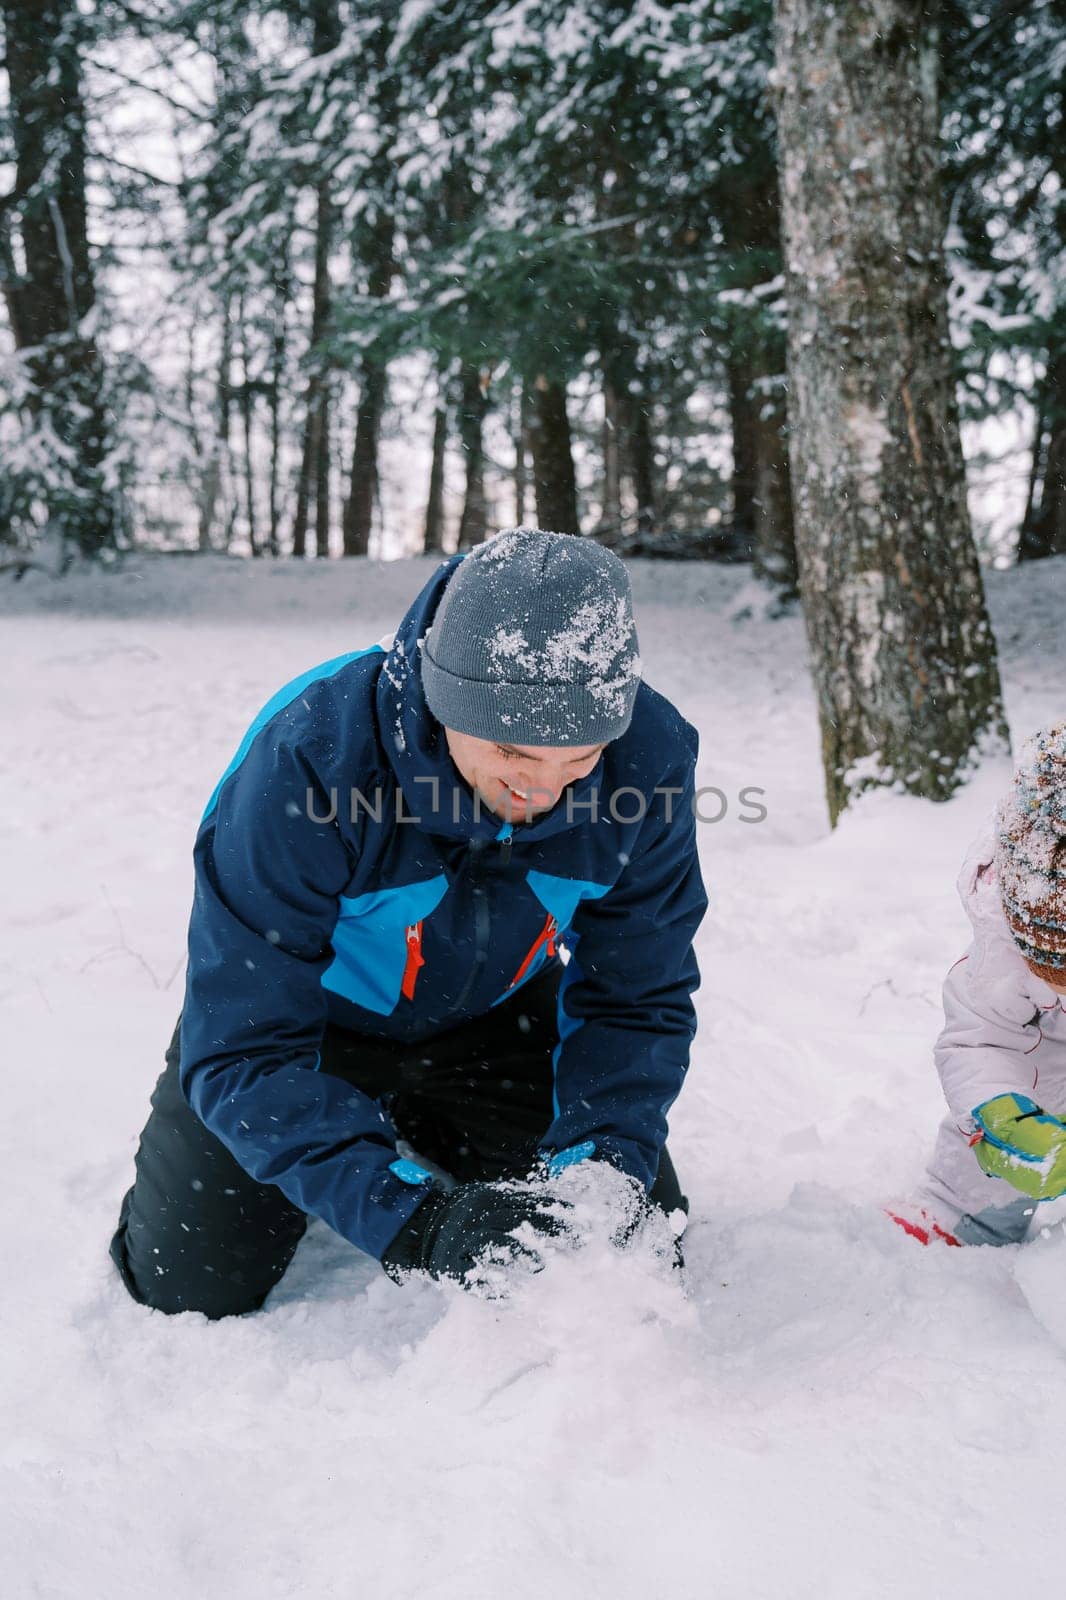 Dad and little child make a snowman while squatting in a snowy forest. Cropped by Nadtochiy